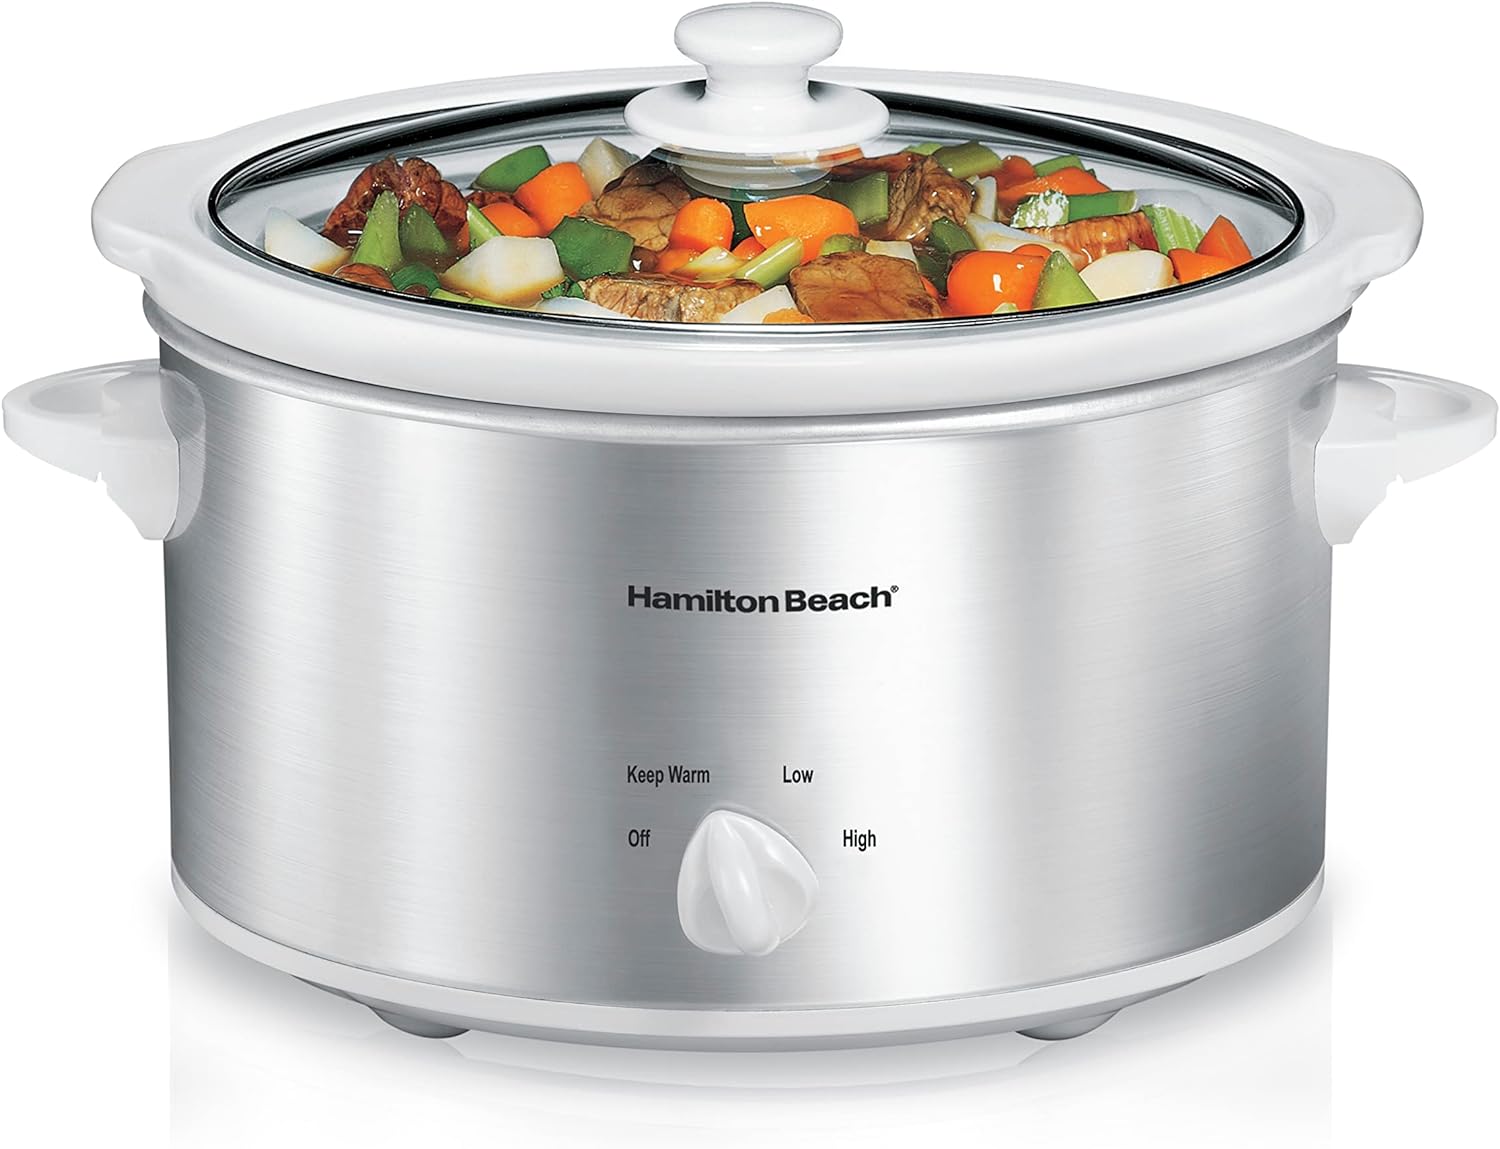 Hamilton Beach Slow Cooker, Extra Large 10 Quart, Stay or Go Portable, Black (33195)  4-Quart Slow Cooker with Dishwasher-Safe Stoneware Crock  Lid, Stainless Steel (33140V)